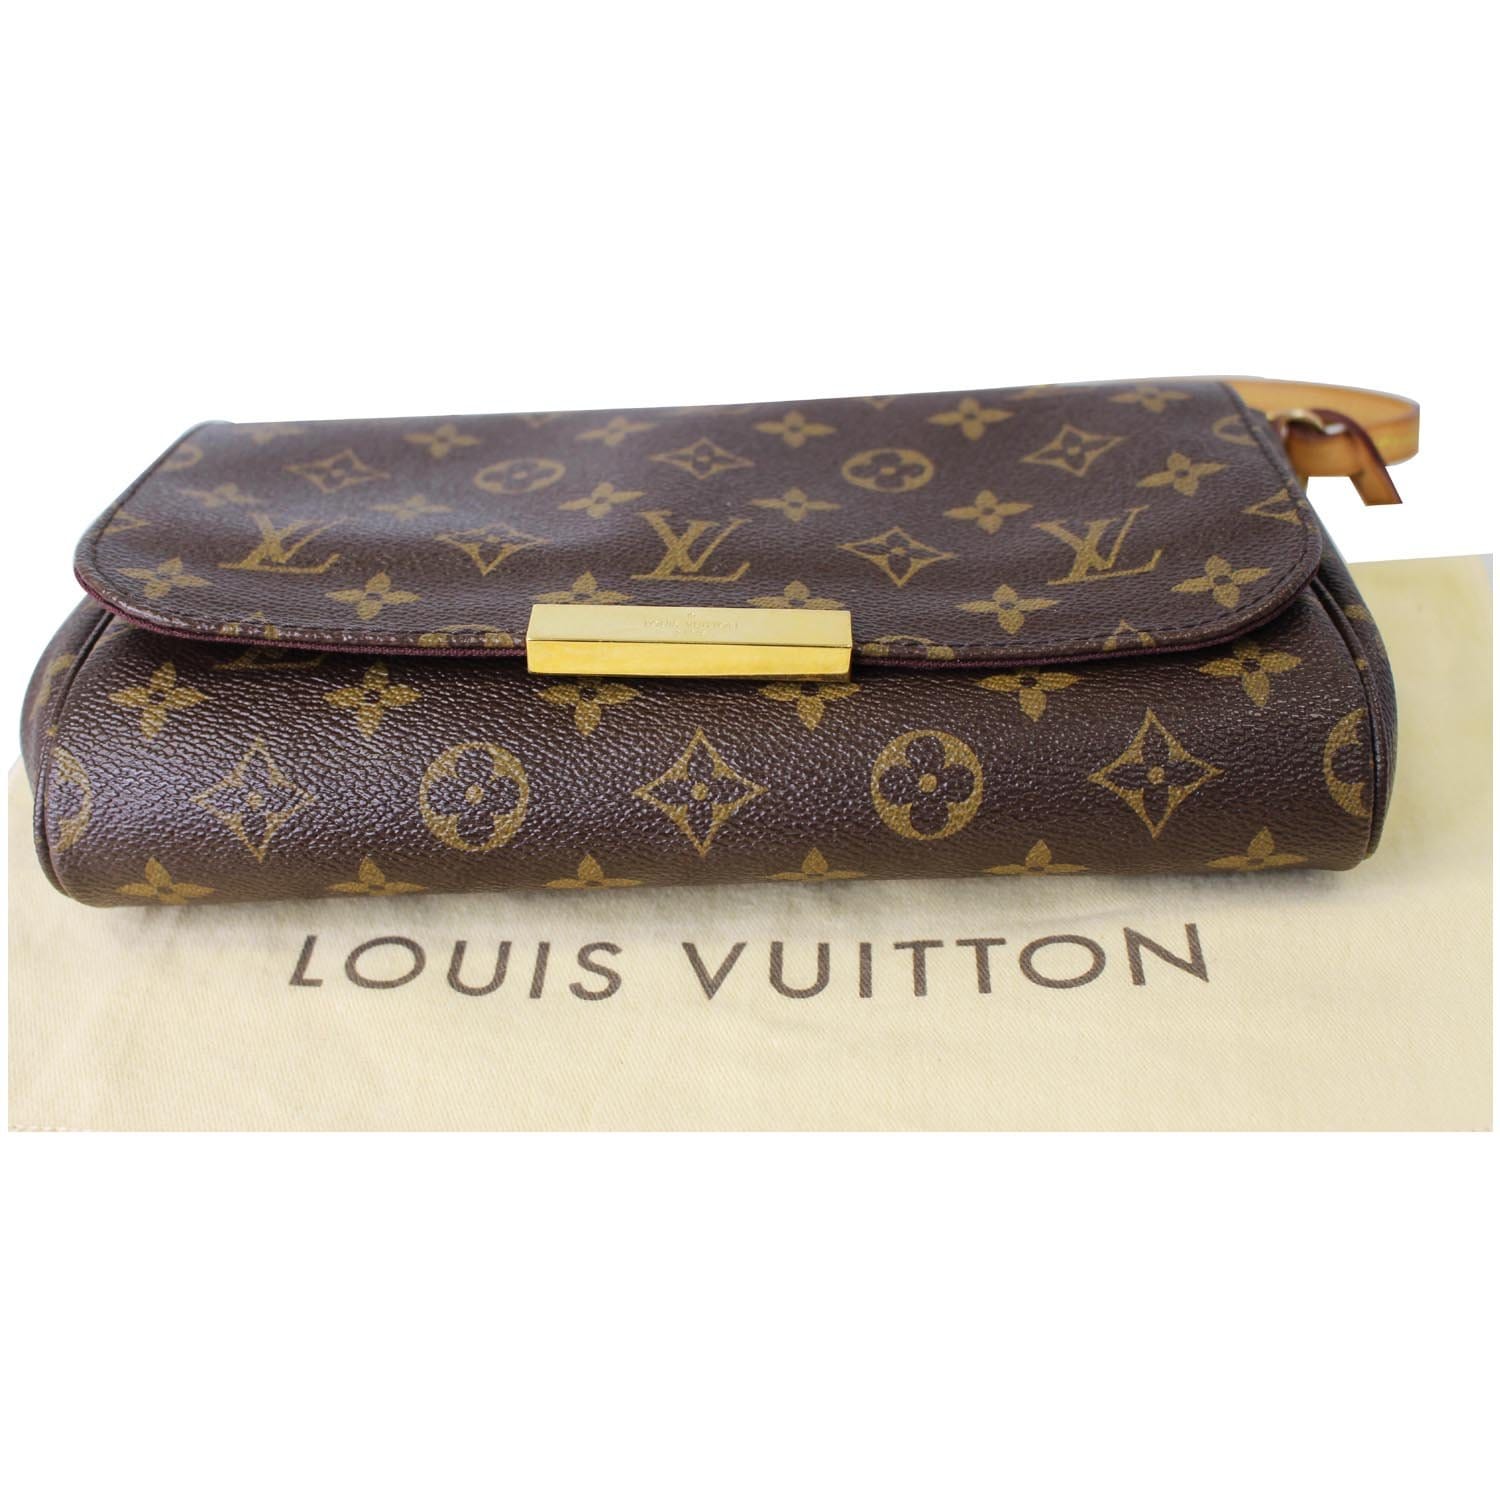 Favorite leather crossbody bag Louis Vuitton Brown in Leather - 31025166